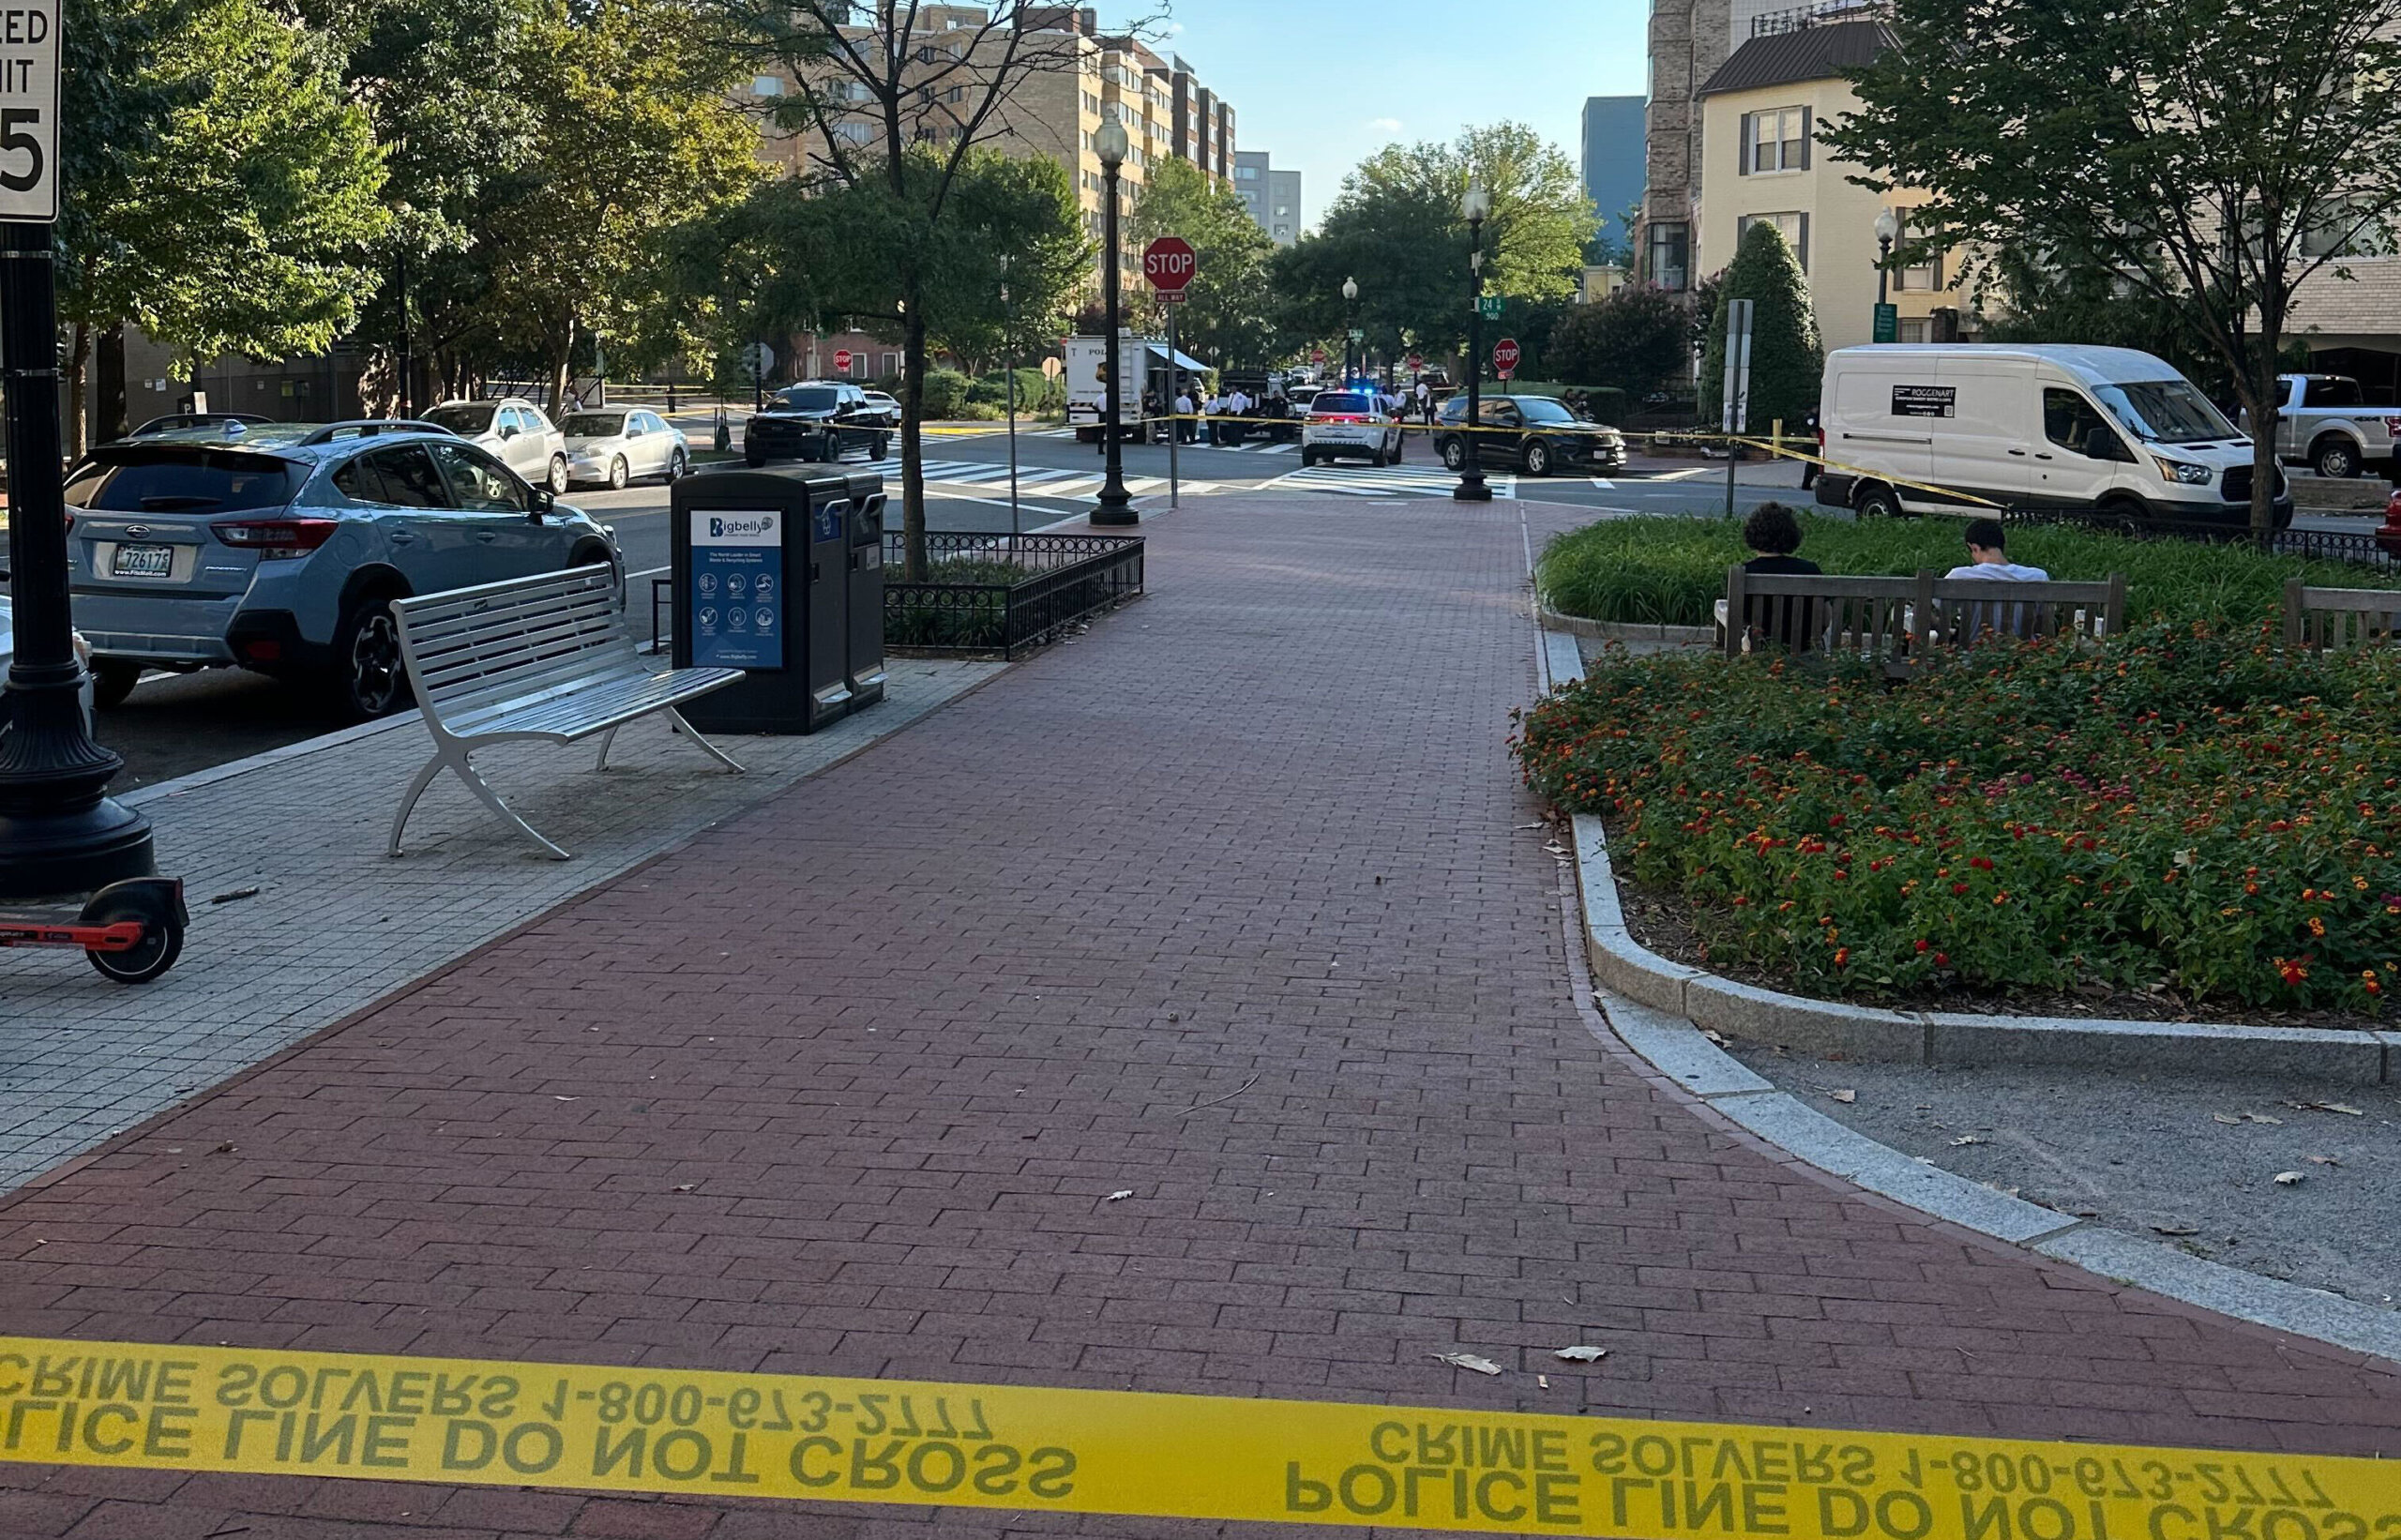 Homicide suspect escapes from GWU Hospital in DC